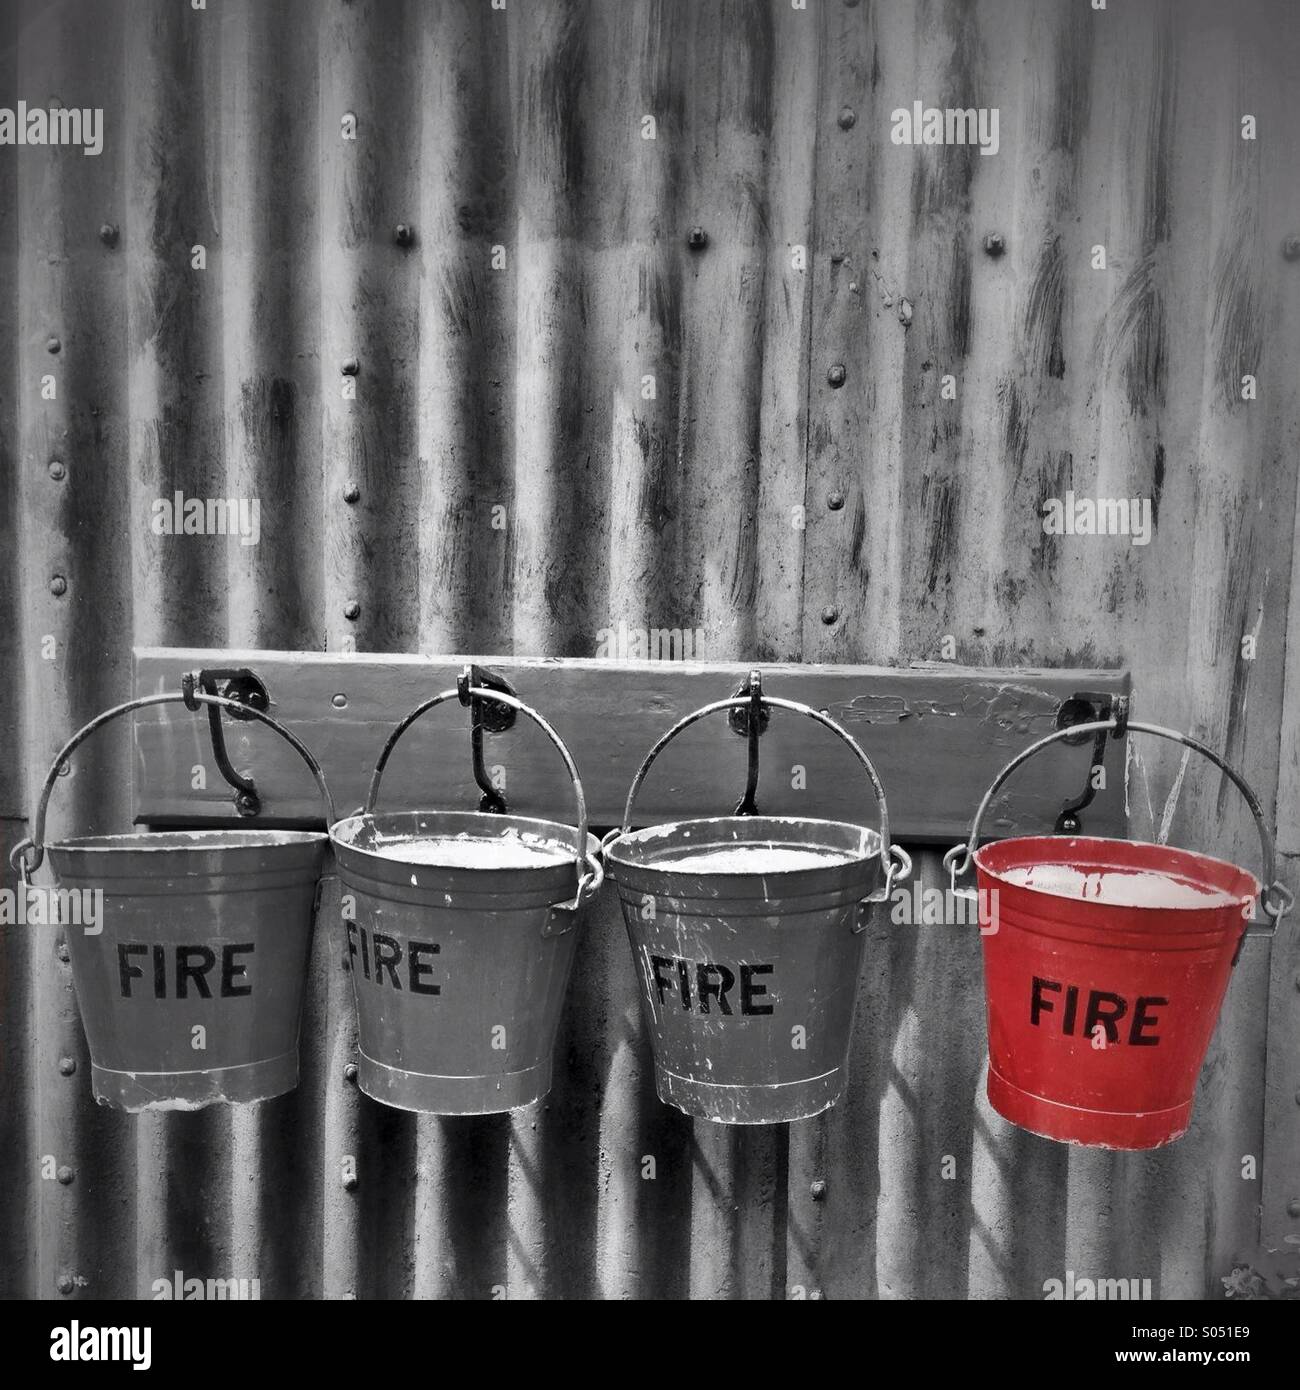 Fire buckets hanging on a wall Stock Photo